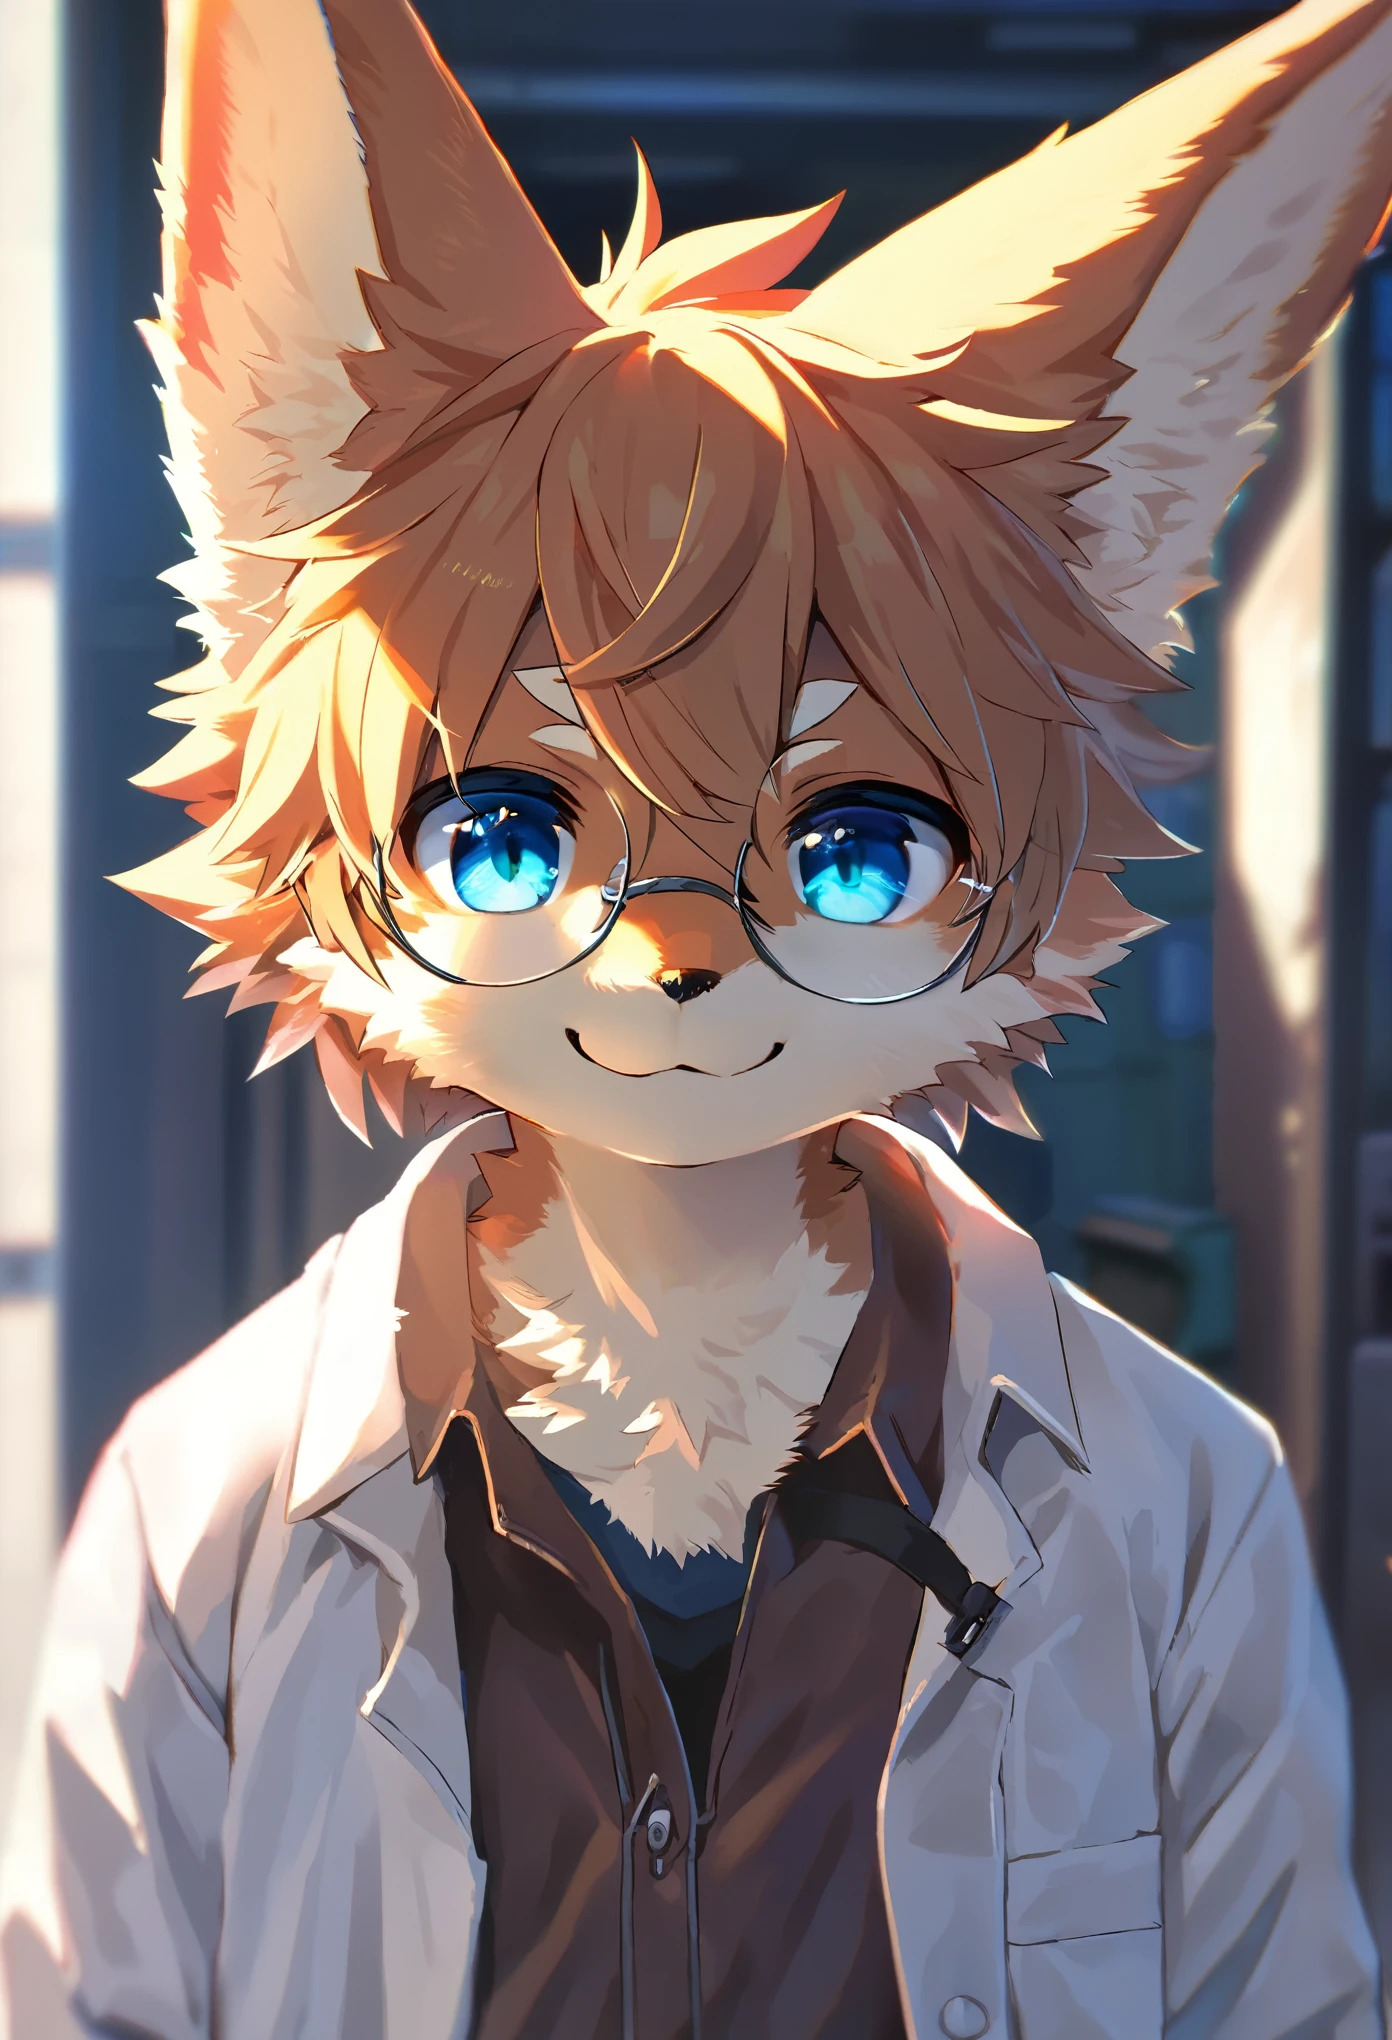 highres, paid reward available, unparalleled masterpiece, street(highly detailed beautiful face and eyes)absurdres, perfect anatomy, good lighting, volumetric lighting, cinematic shadow(angelic handsome 1boy, kemono, solo focus, single, Smiling embarrassedly, glasses)(furry anthro:1.7)(Furry body, dog facial features, dog body features)(very detailed body fur)Handouts((college professor))Dirty lab coat, class, Difficult formulas, white board,